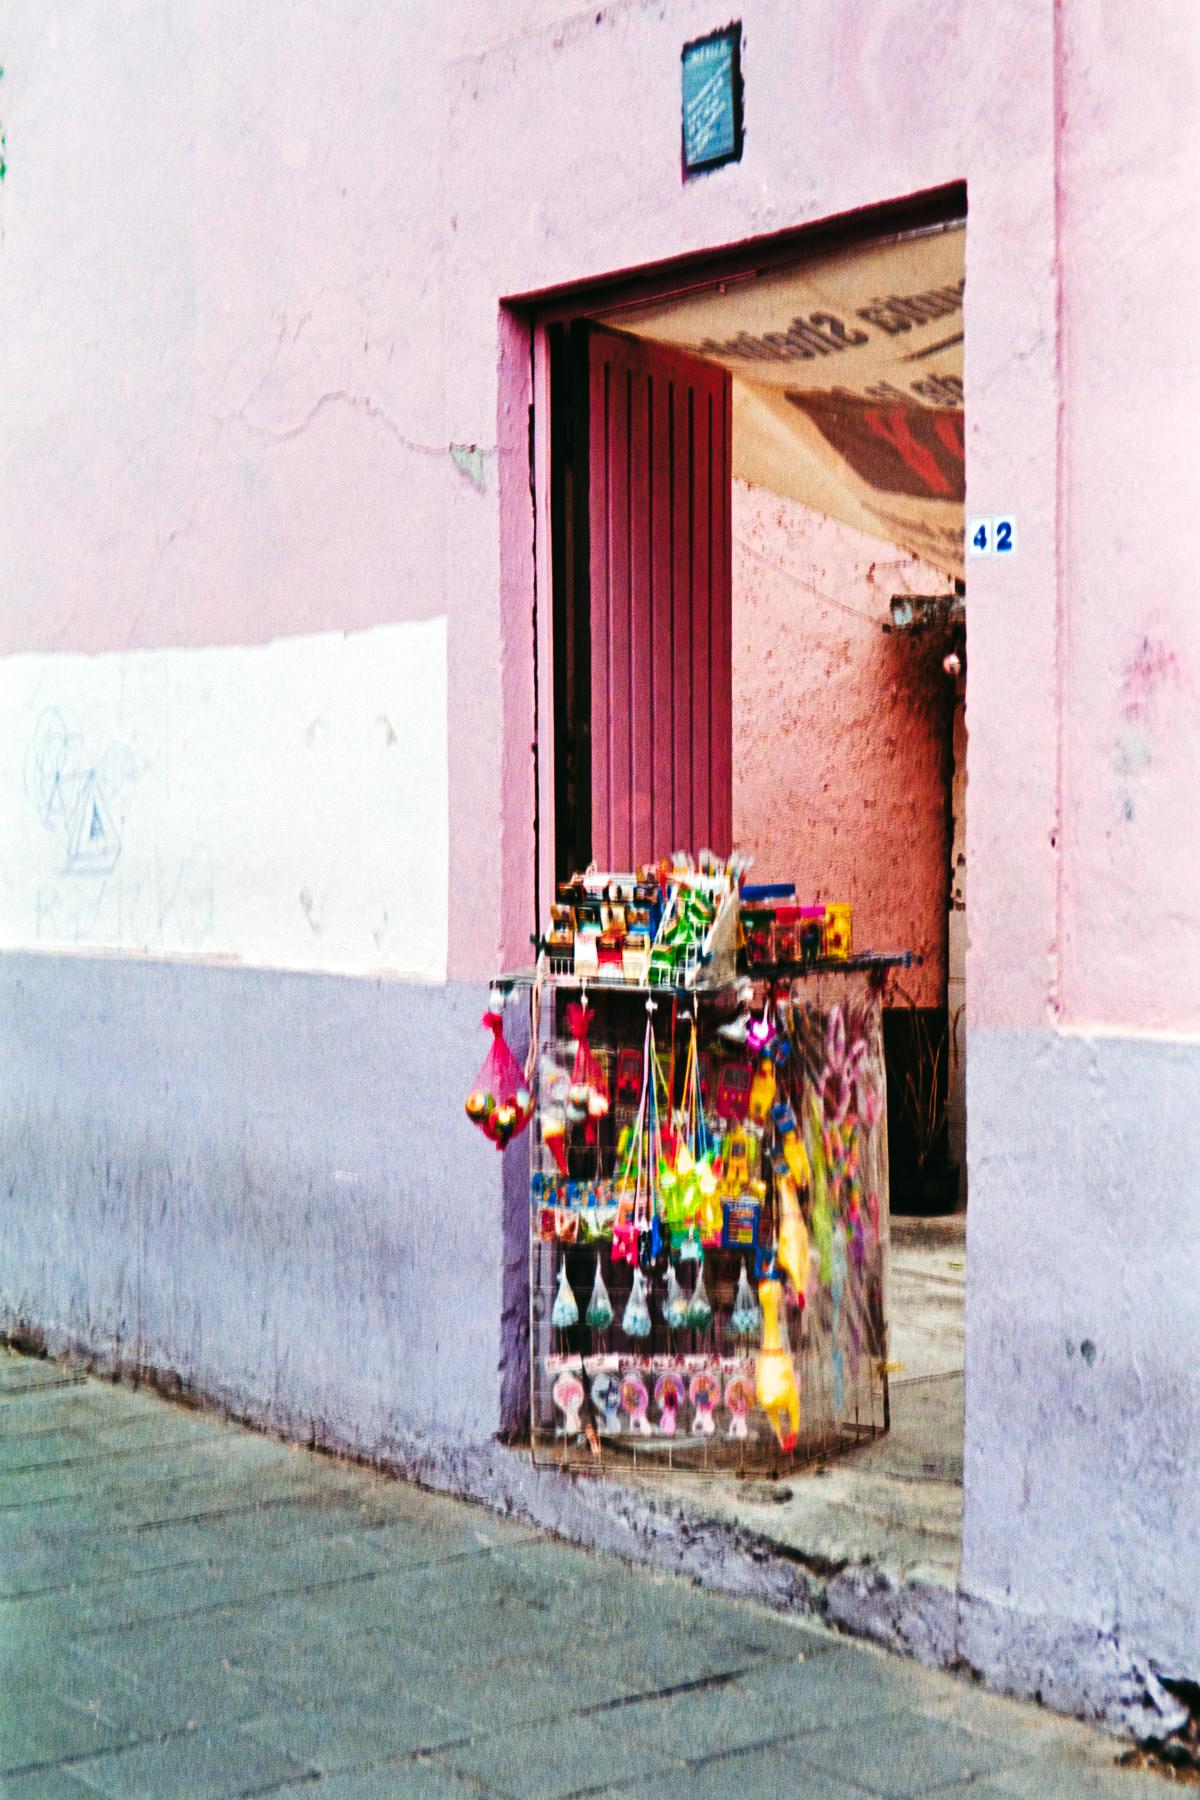 photograph of a door in a pink wall in Mexico city, with unattended candy cart standing in the frame